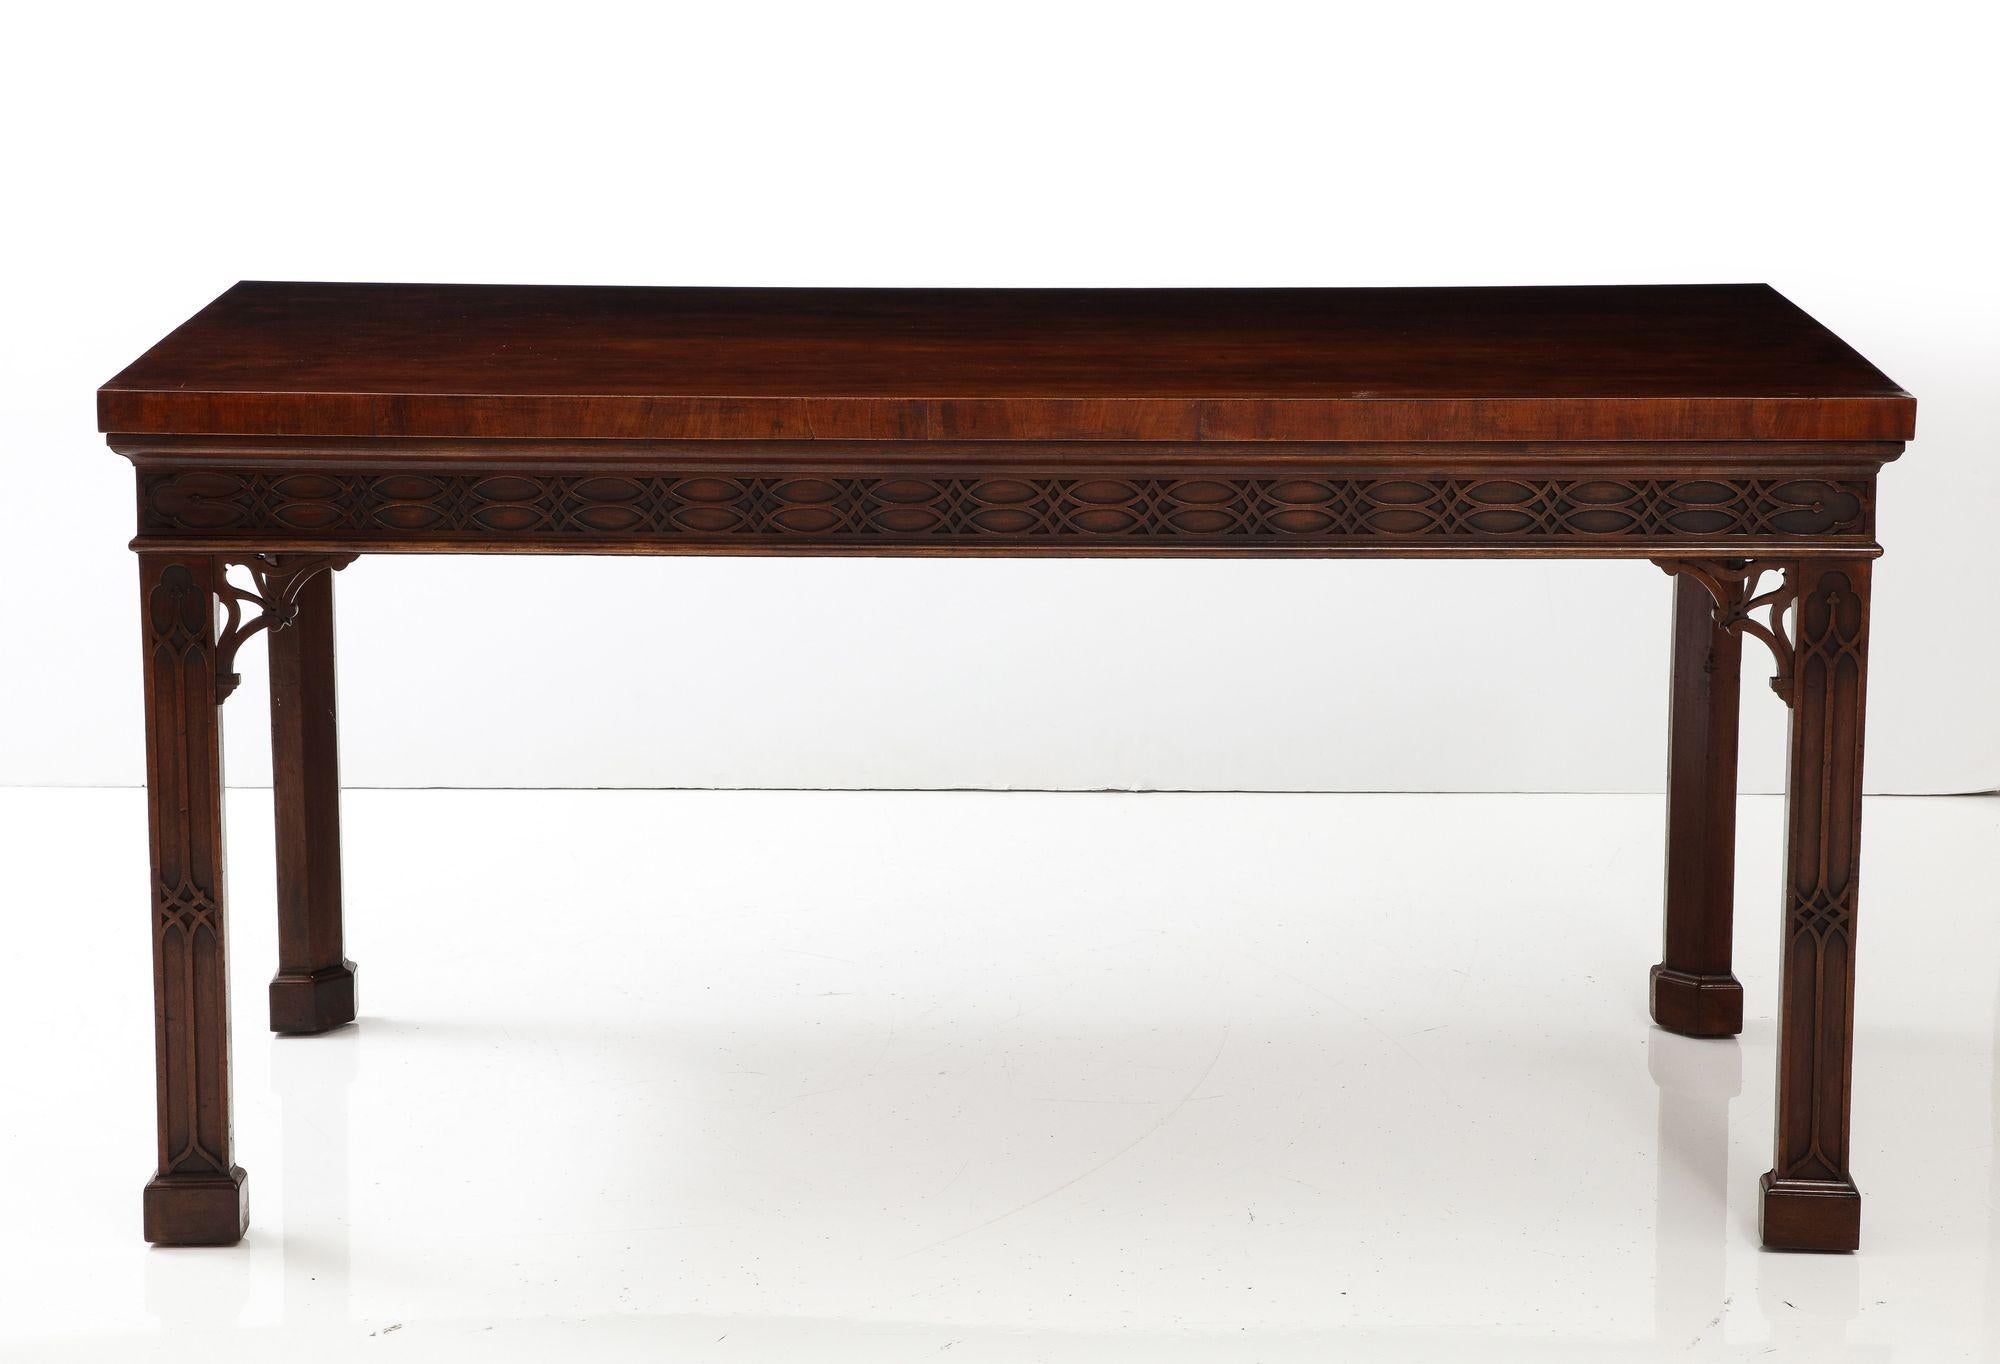 Very fine George III mahogany Chinese Chippendale console/serving table, the richly patinated top over blind fretwork carved apron and legs, joined by open fretted brackets and standing on blocked feet, the whole with good rich color and timber.